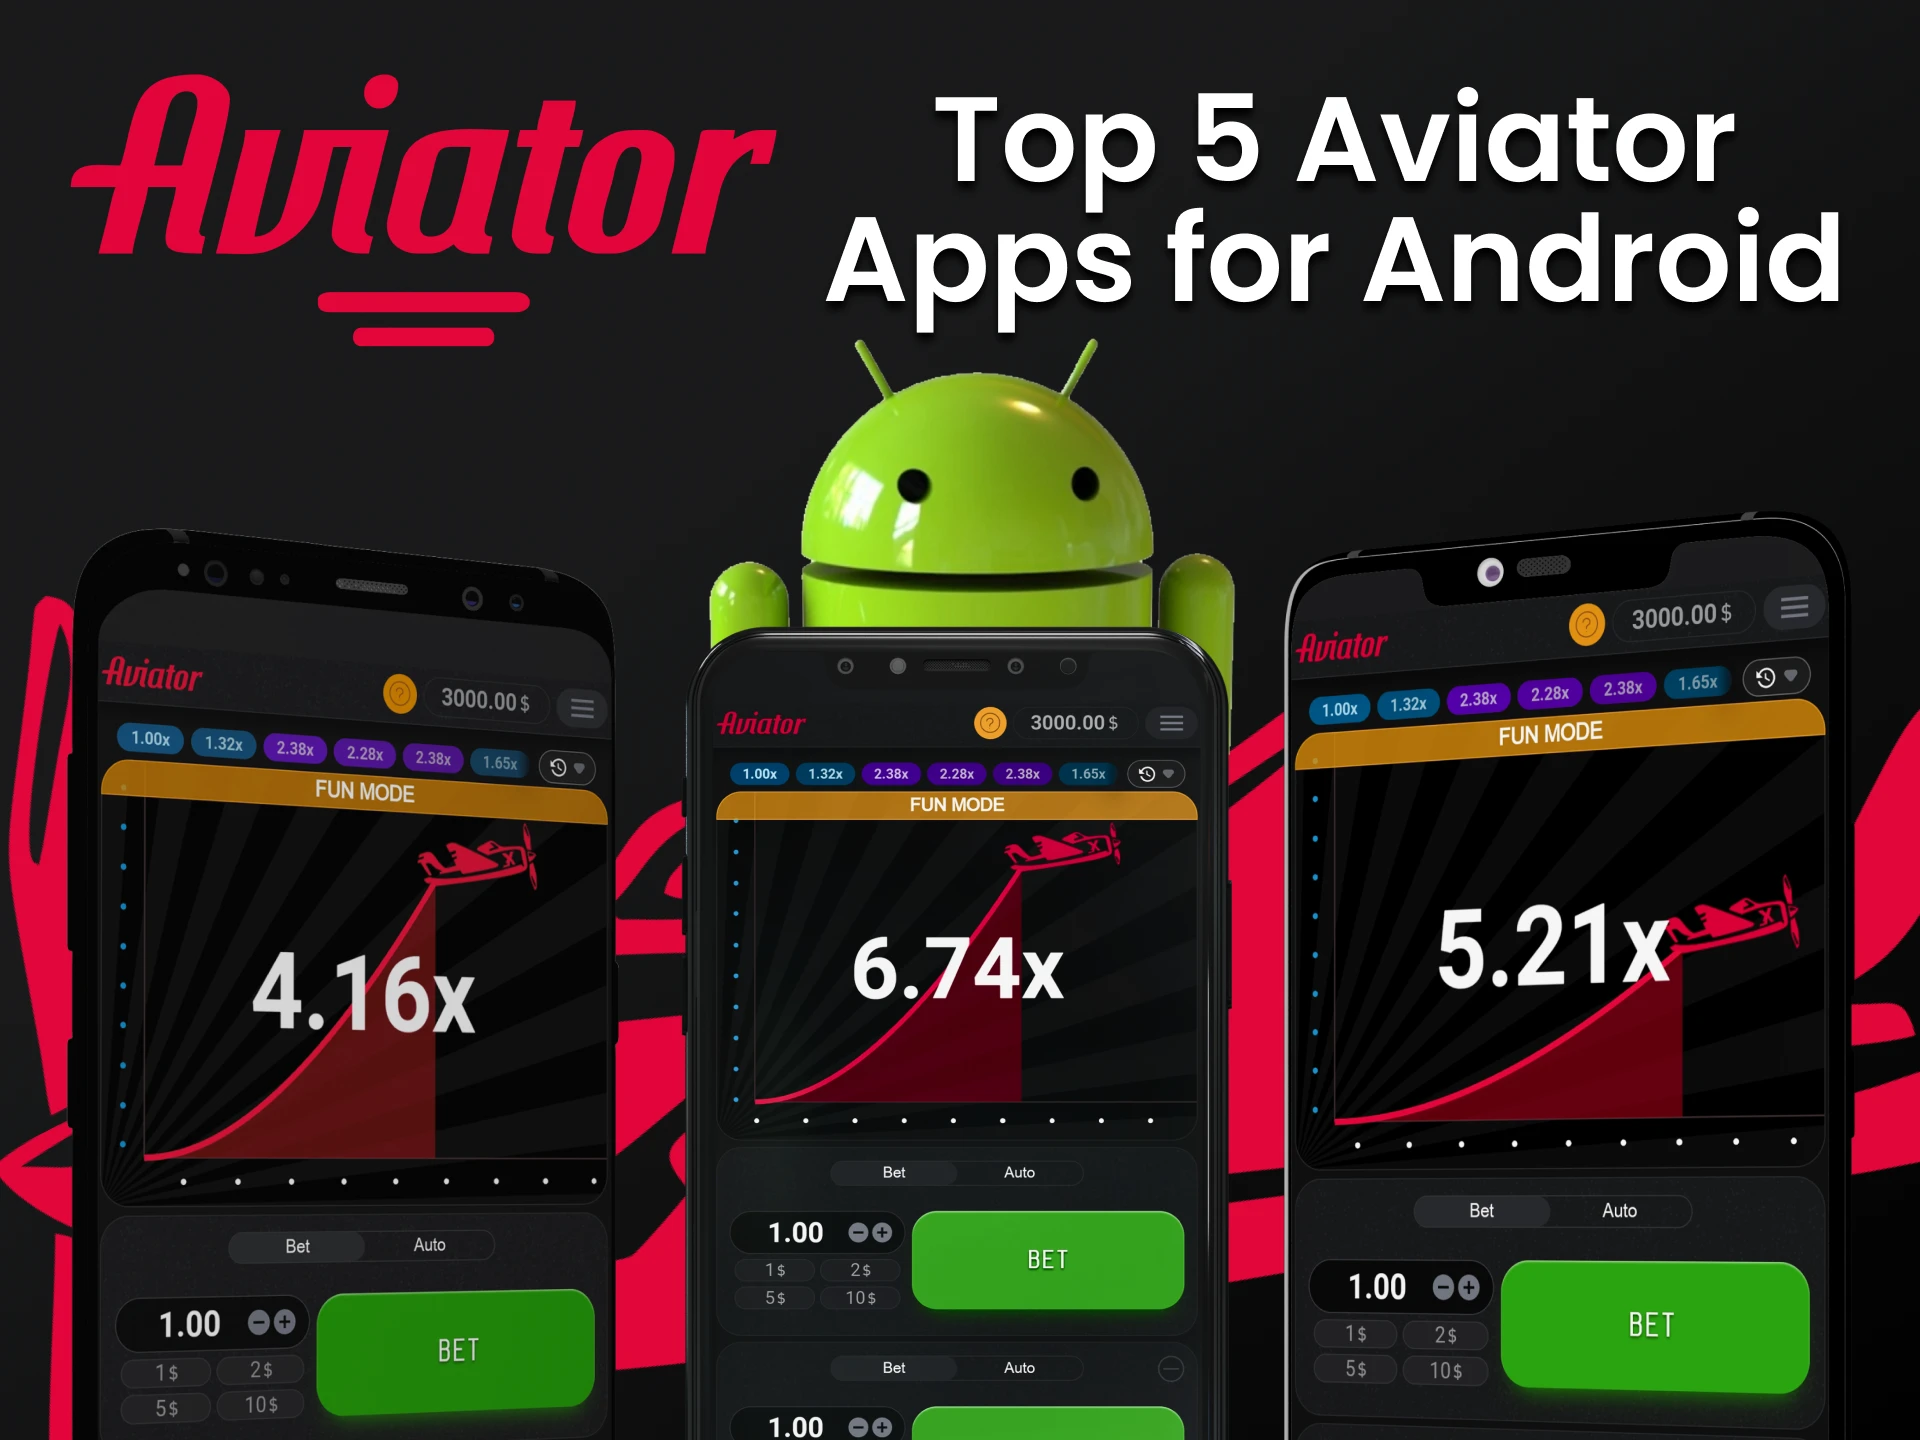 Choose the top 5 apps for Android to play Aviator.